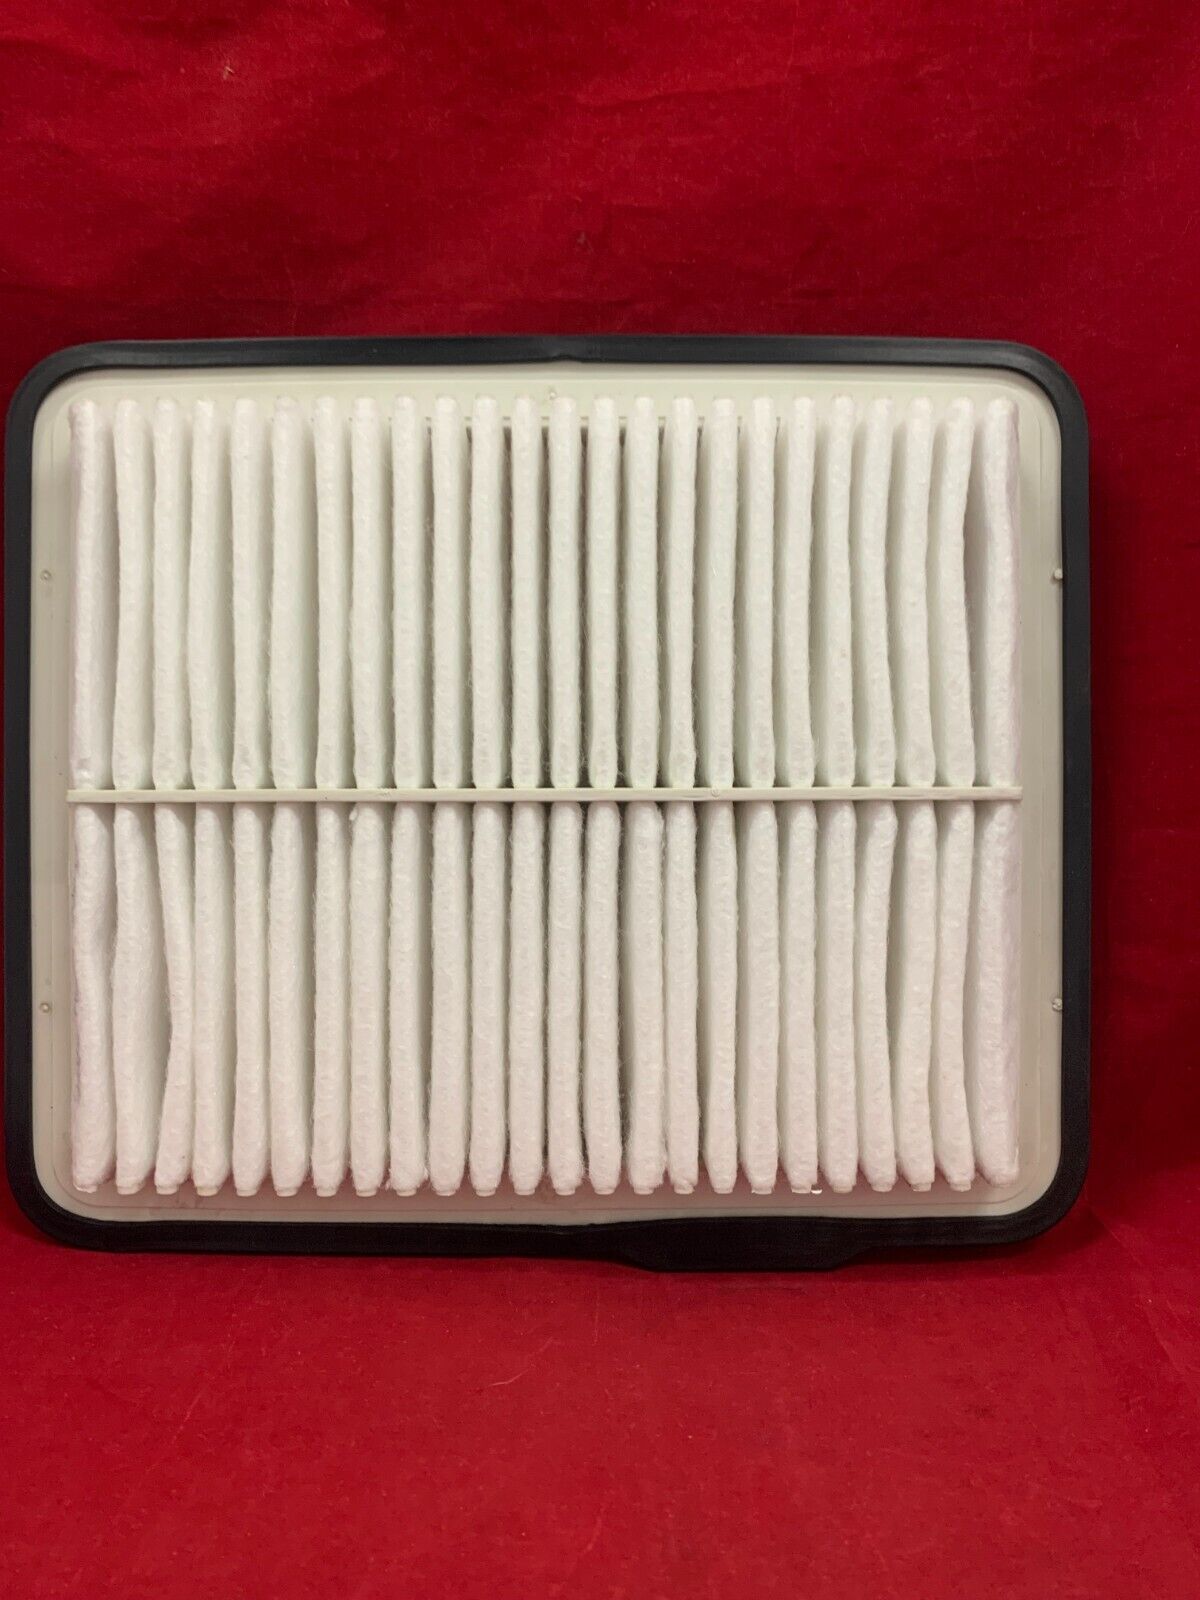 Engine Air Filter Fits Chevy Malibu Buick Lucerne Cadillac DTS Torrent 22676970